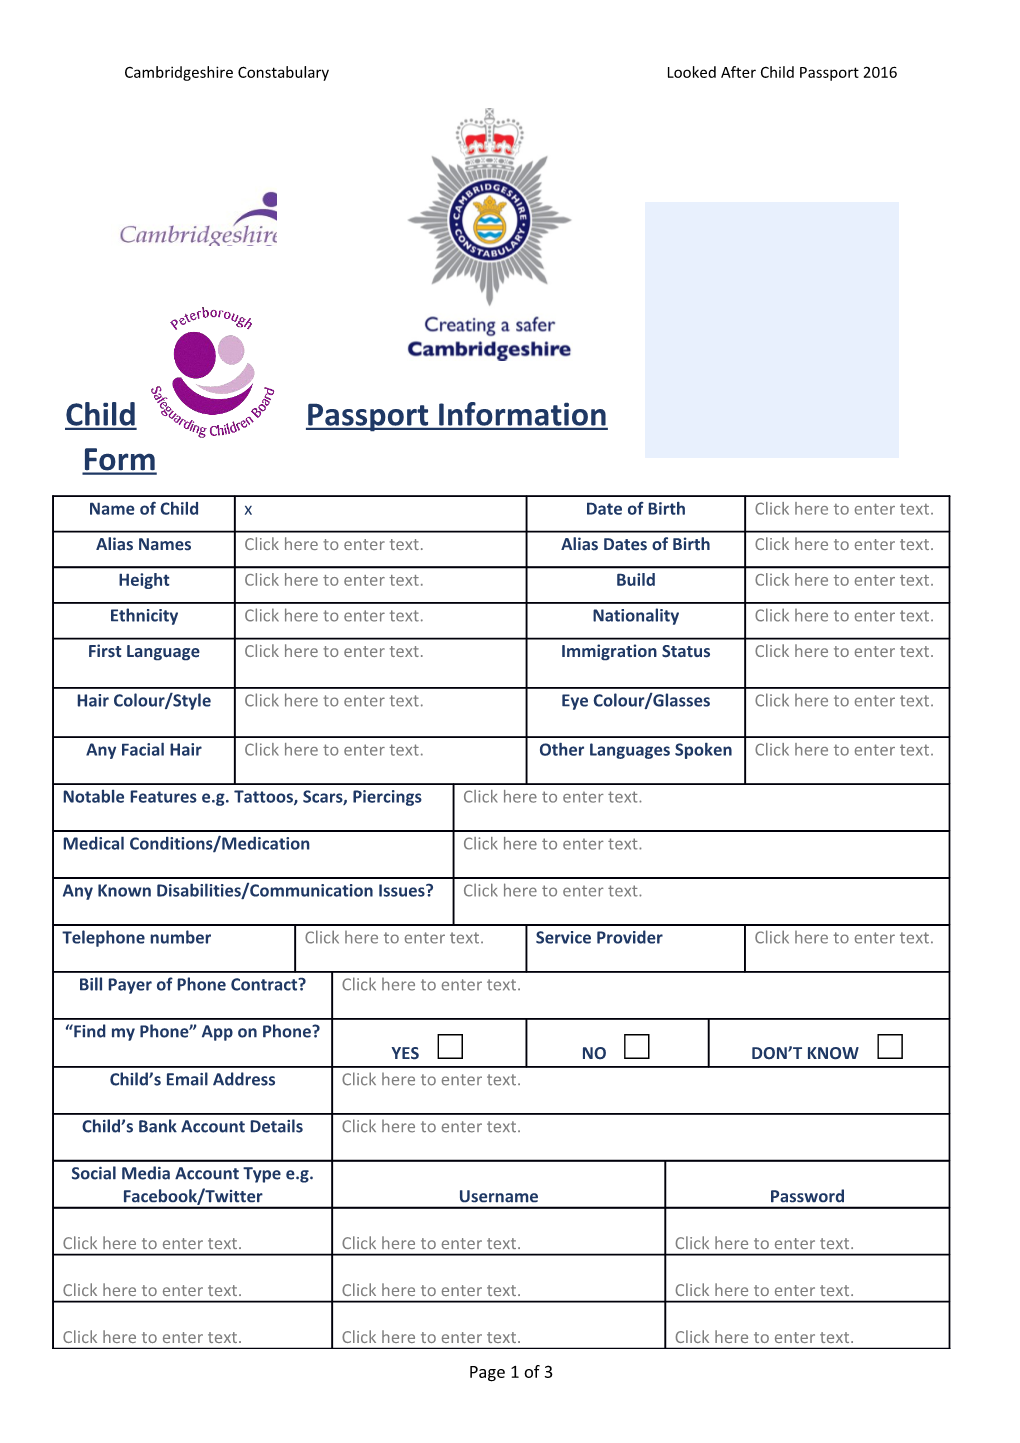 Looked After Child Passport 2016